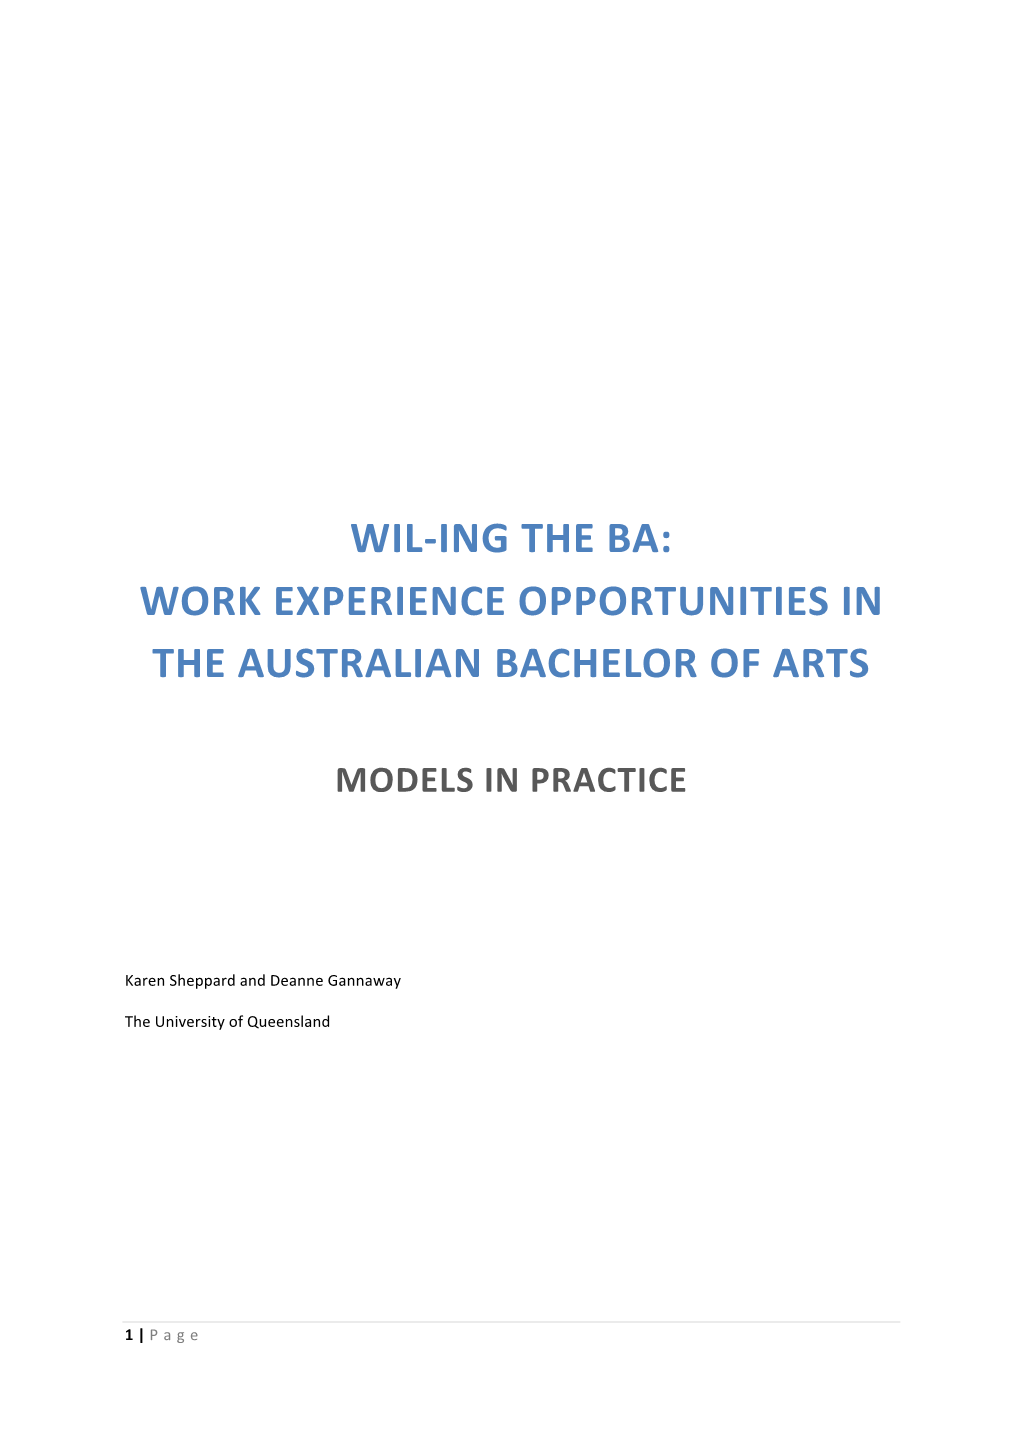 Wil-Ing the Ba: Work Experience Opportunities in the Australian Bachelor of Arts